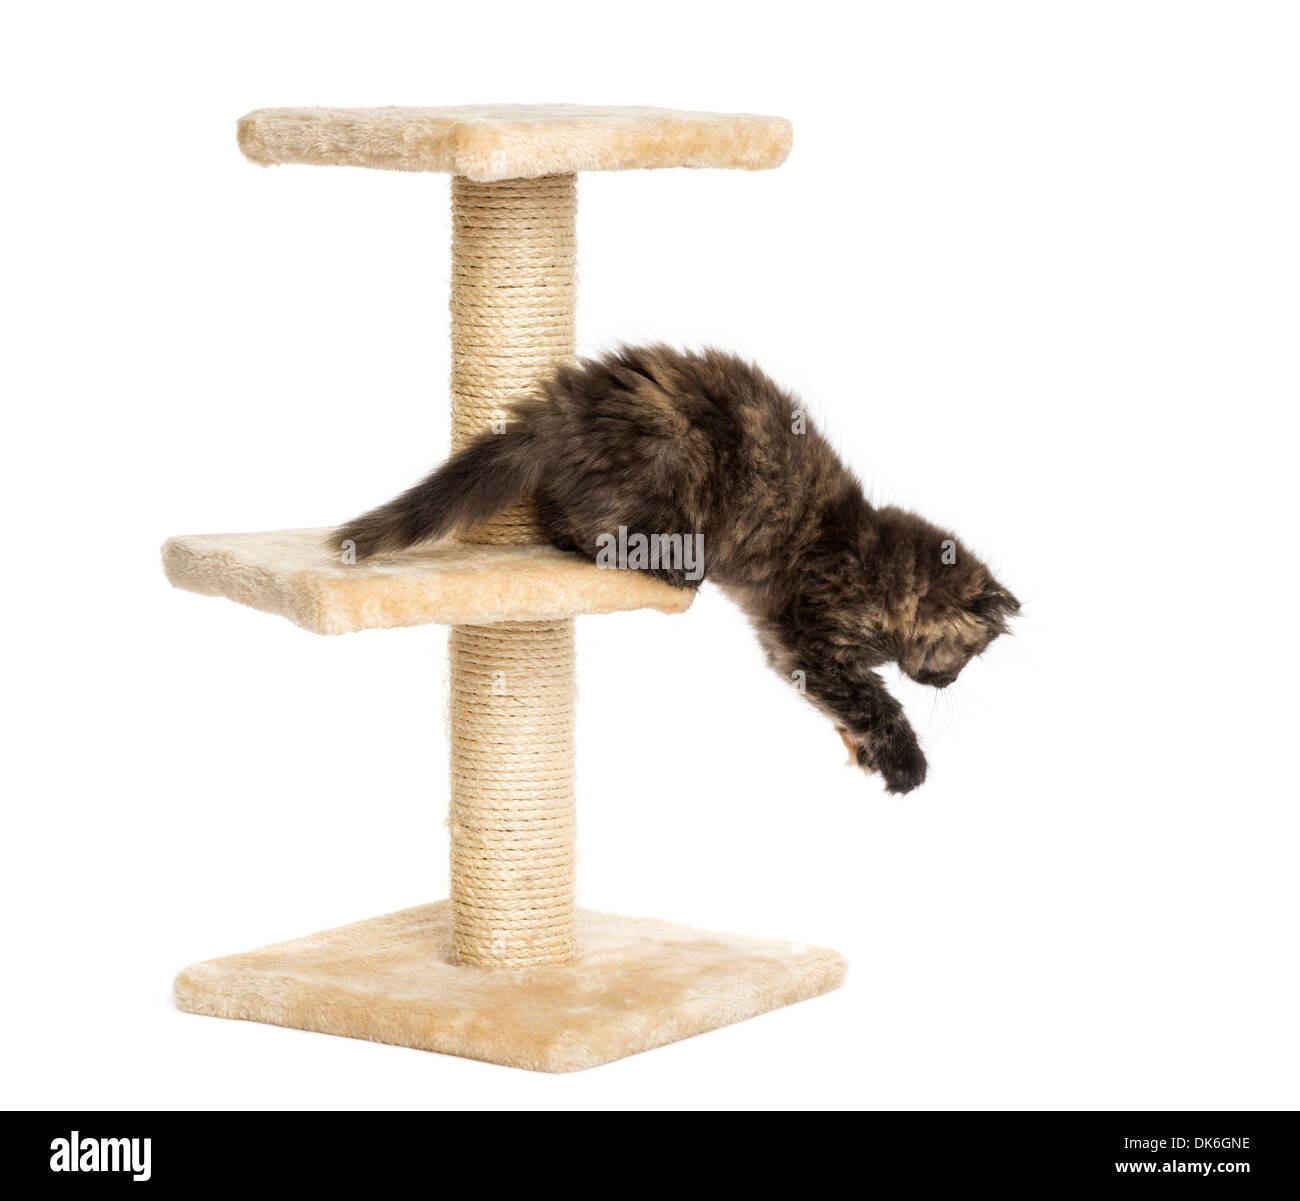 Highland fold kitten jumping from a cat tree against white background Stock Photo